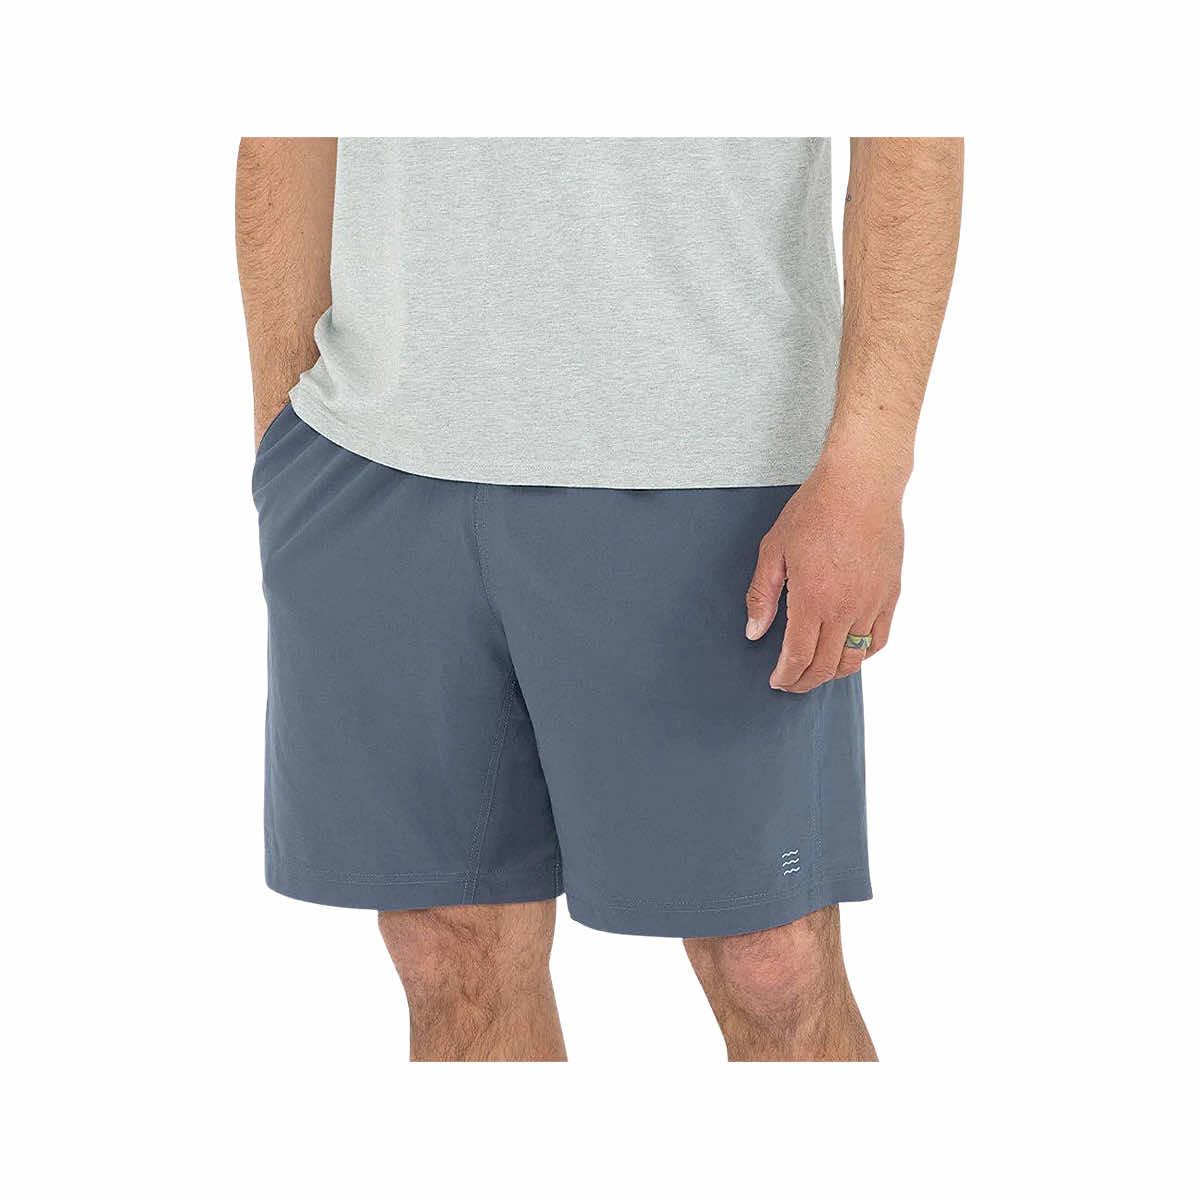  Men's Lined Breeze Shorts - 7 Inches